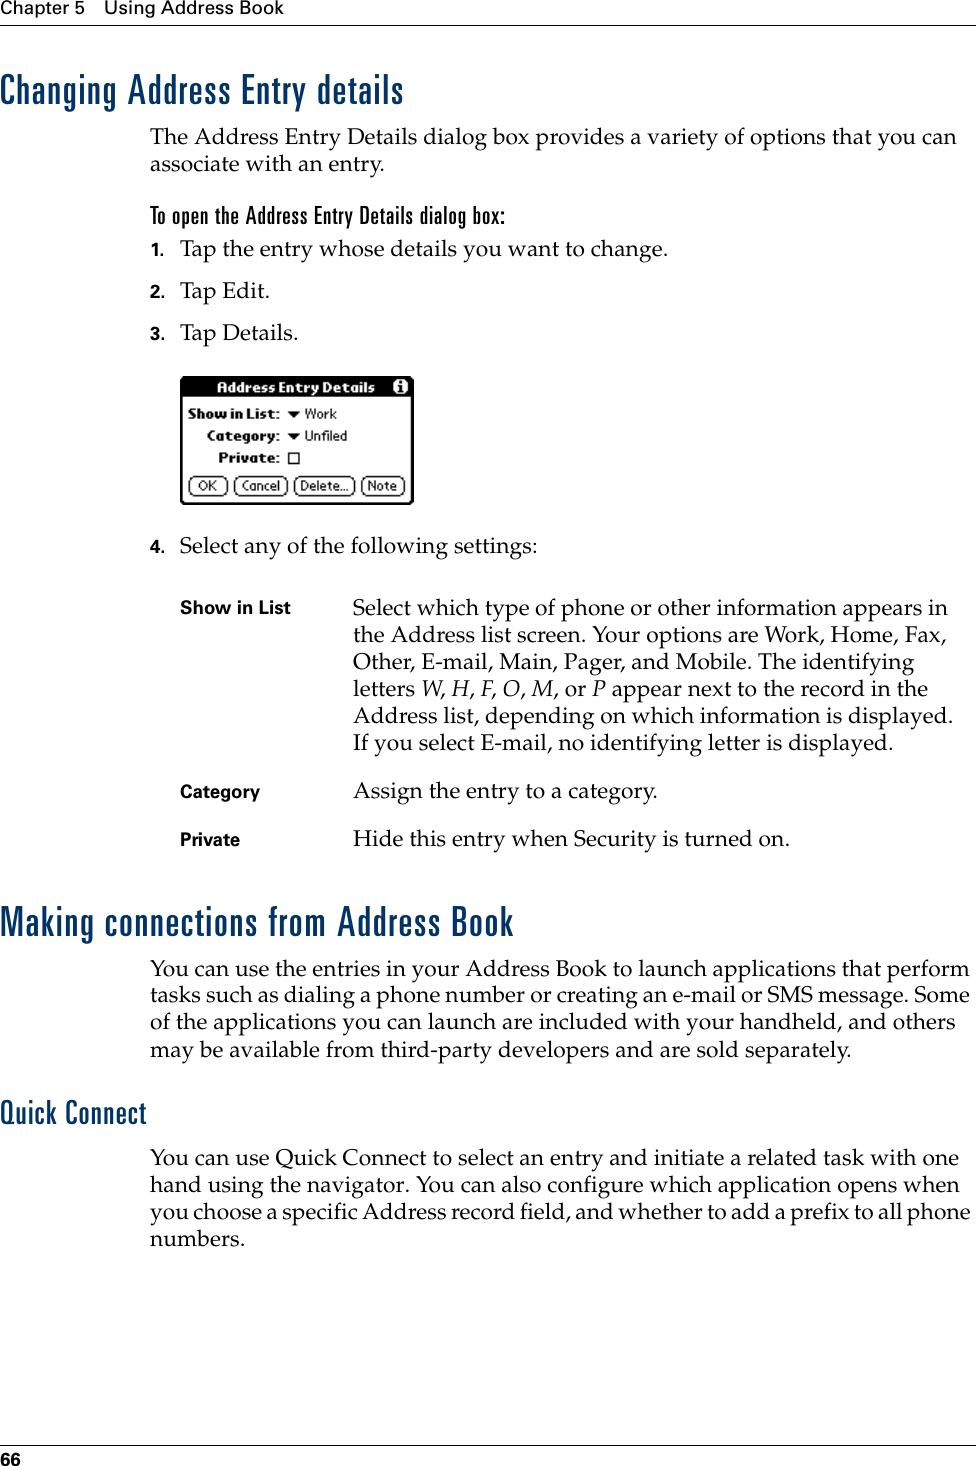 Chapter 5 Using Address Book66Changing Address Entry detailsThe Address Entry Details dialog box provides a variety of options that you can associate with an entry. To open the Address Entry Details dialog box:1. Tap the entry whose details you want to change.2. Tap Edit.3. Tap De tail s.4. Select any of the following settings:Making connections from Address BookYou can use the entries in your Address Book to launch applications that perform tasks such as dialing a phone number or creating an e-mail or SMS message. Some of the applications you can launch are included with your handheld, and others may be available from third-party developers and are sold separately. Quick ConnectYou can use Quick Connect to select an entry and initiate a related task with one hand using the navigator. You can also configure which application opens when you choose a specific Address record field, and whether to add a prefix to all phone numbers.Show in List Select which type of phone or other information appears in the Address list screen. Your options are Work, Home, Fax, Other, E-mail, Main, Pager, and Mobile. The identifying letters W, H, F, O, M, or P appear next to the record in the Address list, depending on which information is displayed. If you select E-mail, no identifying letter is displayed.Category Assign the entry to a category. Private Hide this entry when Security is turned on.Palm, Inc. Confidential